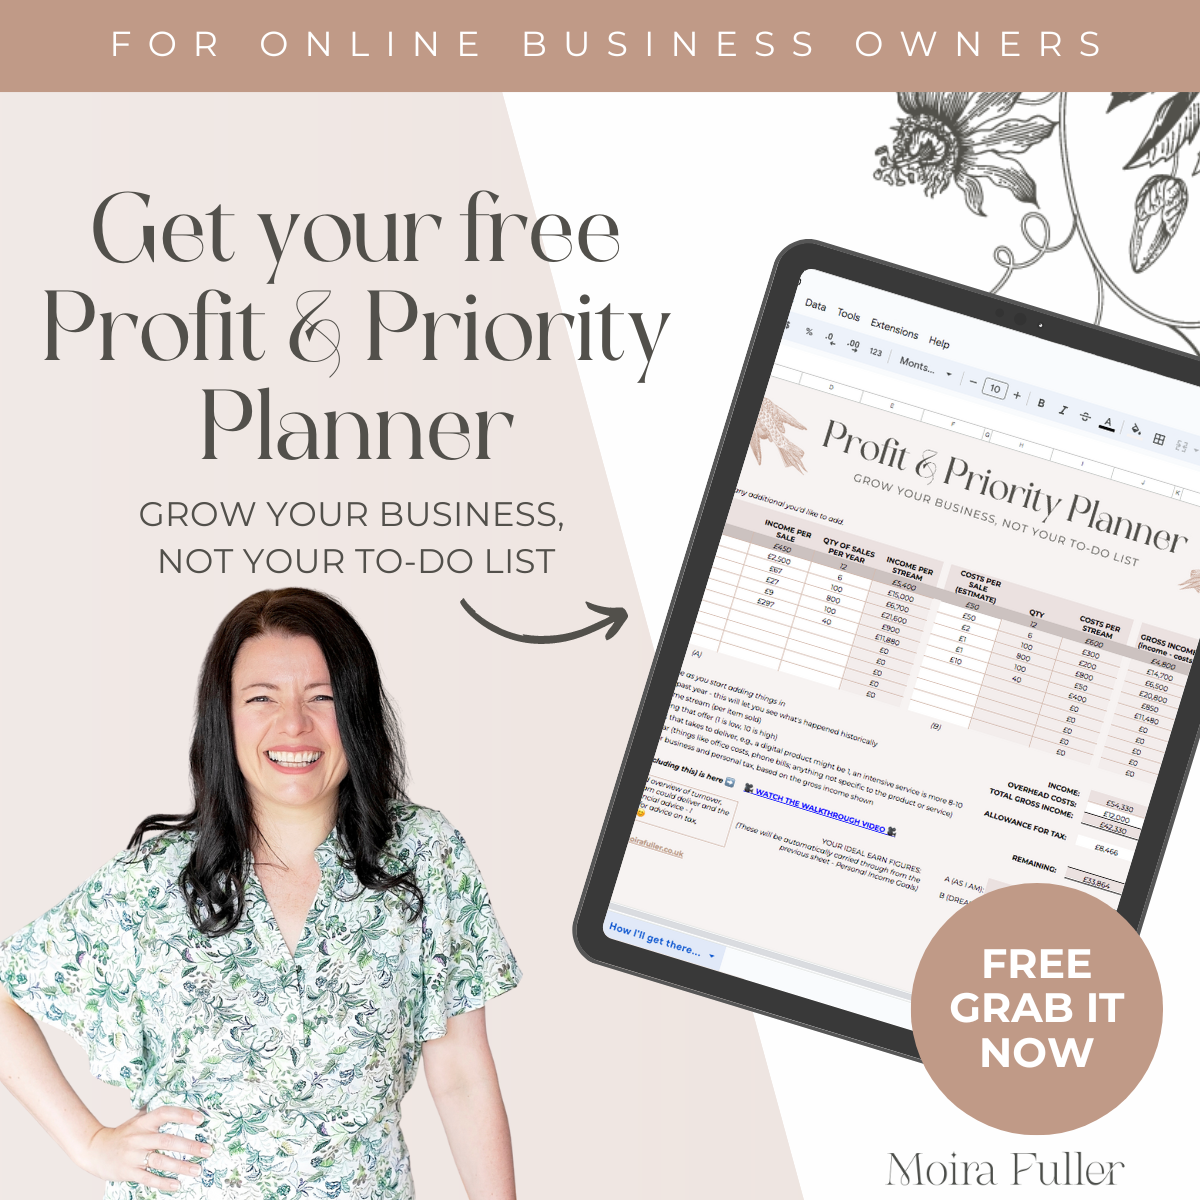 Get your free Profit & Priority Planner